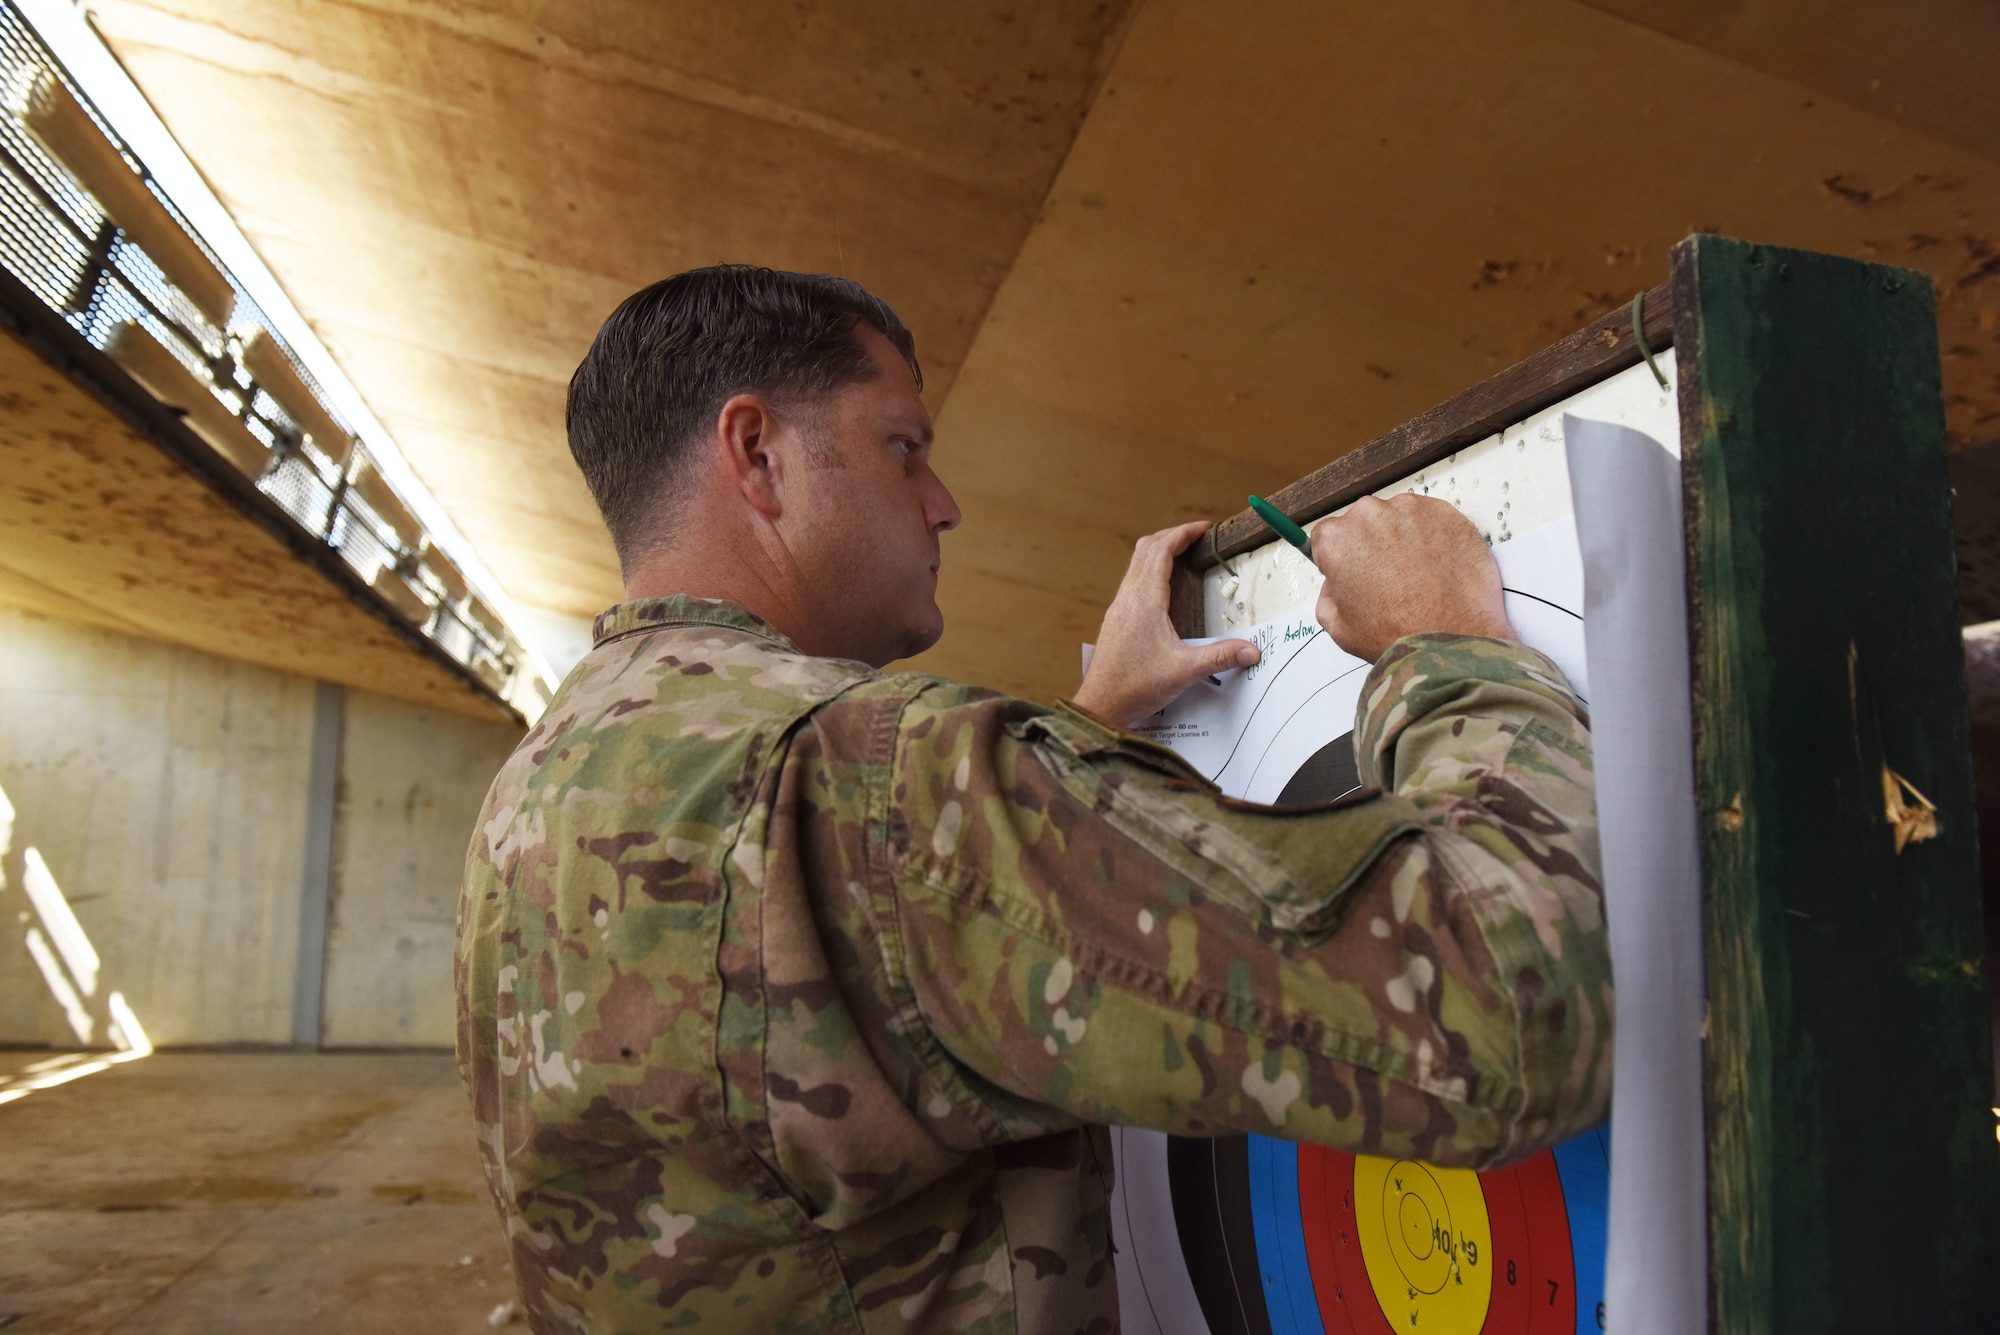 U.S. Air Force Tech. Sgt. Andrew Brown, an Excellent in Competition participant, signs his target after the competition hosted by the 39th Security Forces Squadron Oct. 28, 2019, at Incirlik Air Base, Turkey. Participants in the competition earned points based on the number of shots they landed in the two innermost rings of their respective targets. (U.S. Air Force photo by Staff Sgt. Joshua Magbanua)